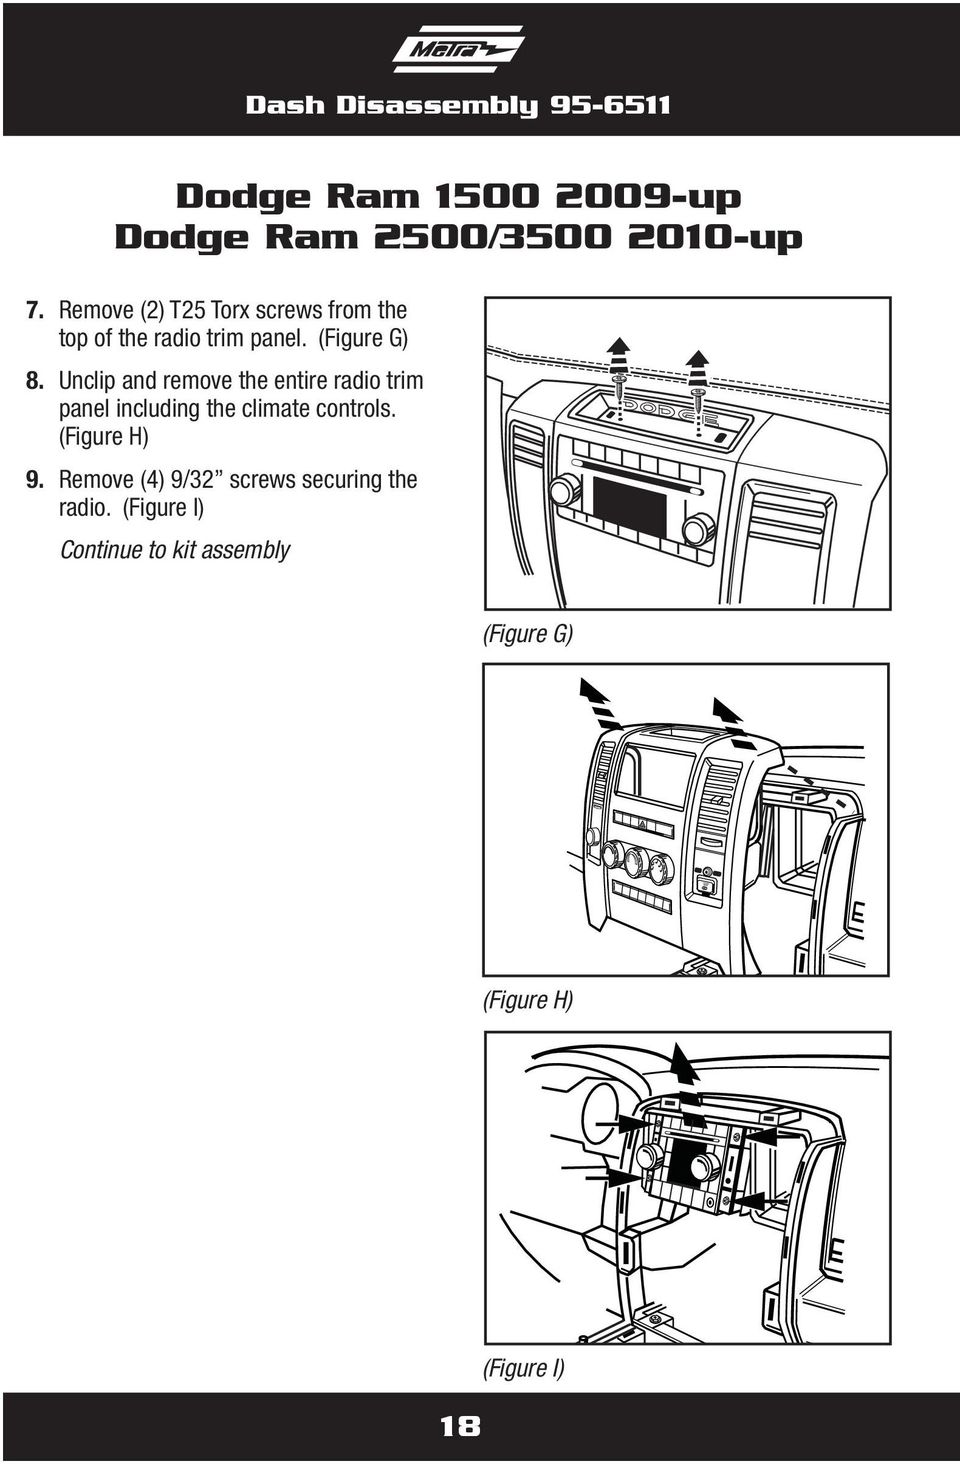 Unclip and remove the entire radio trim panel including the climate controls. (Figure H) 9.